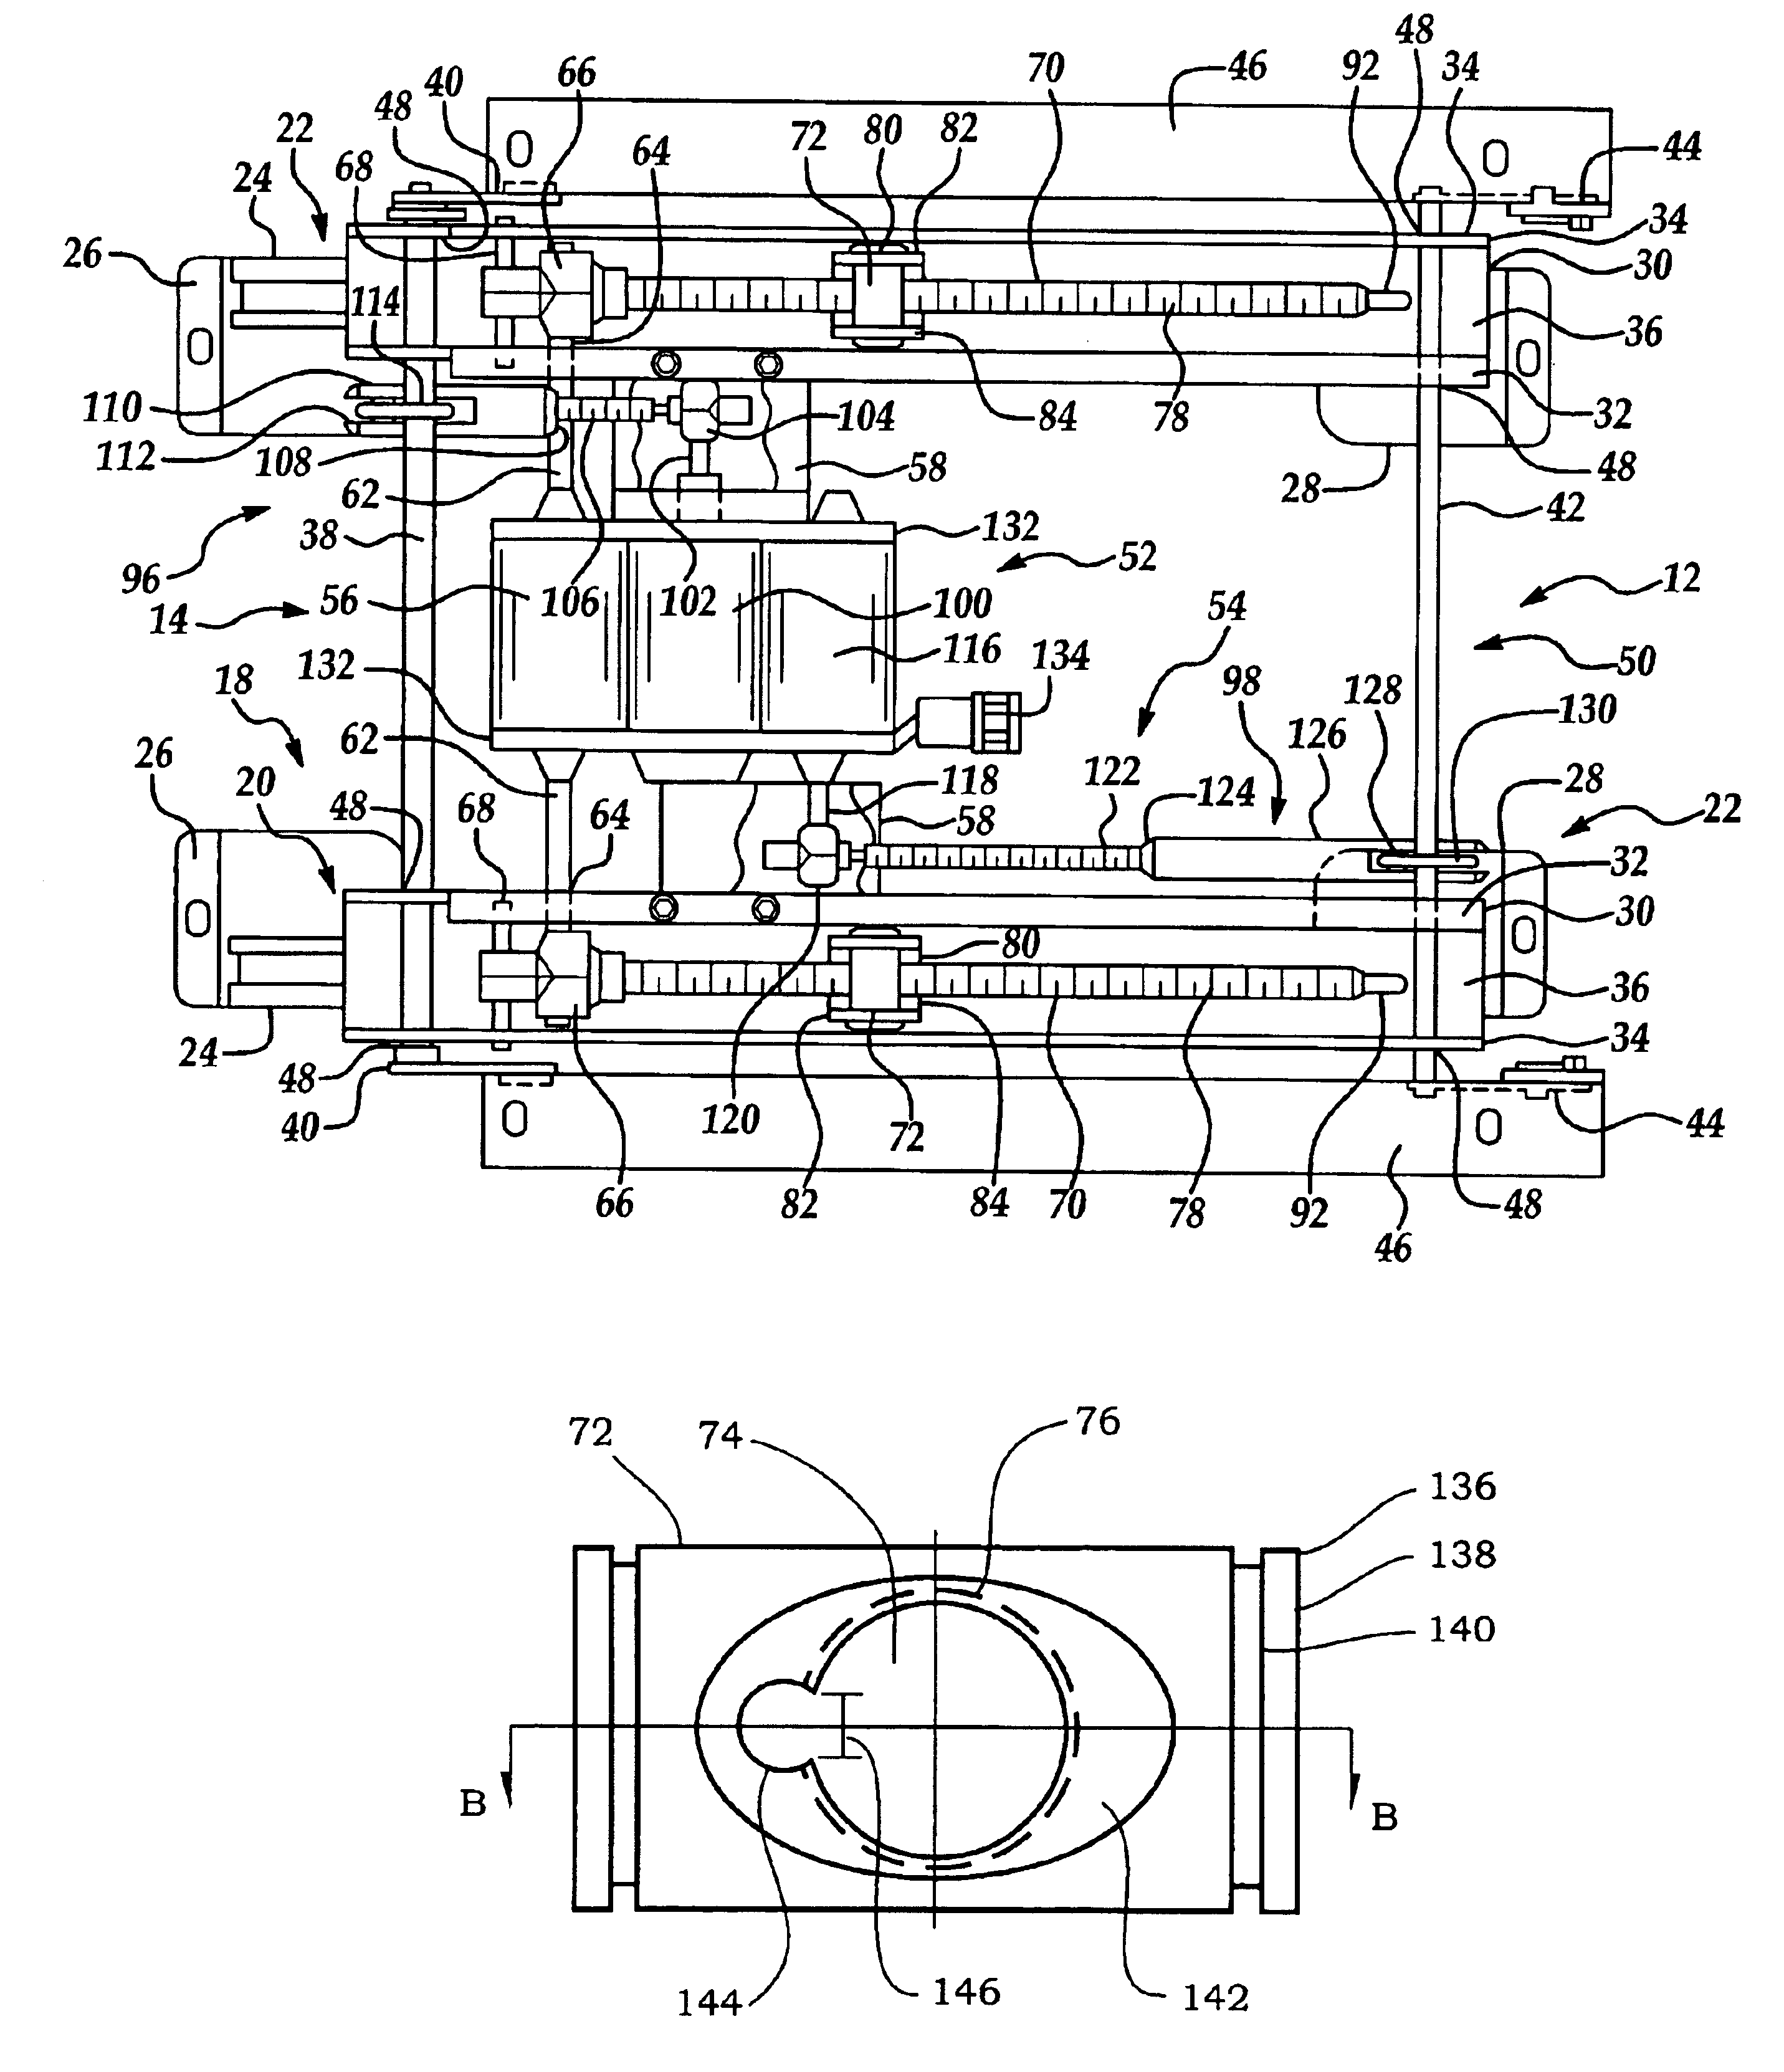 Automotive seat assembly having a self-clearing drive nut